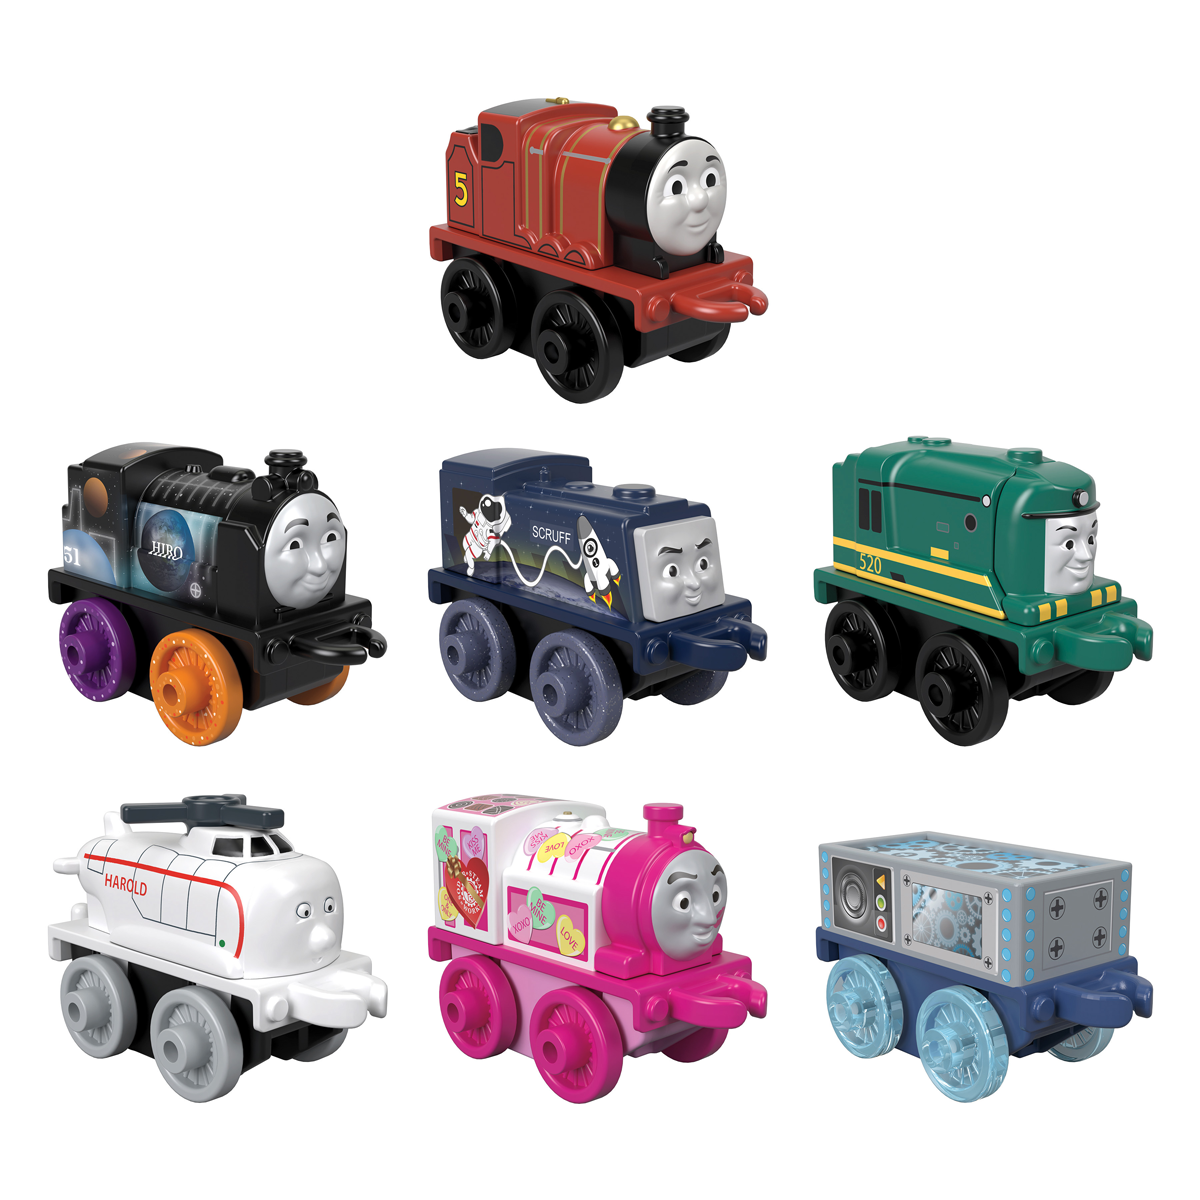 Worlds Coolest Thomas & Friends Minis Trains May Very